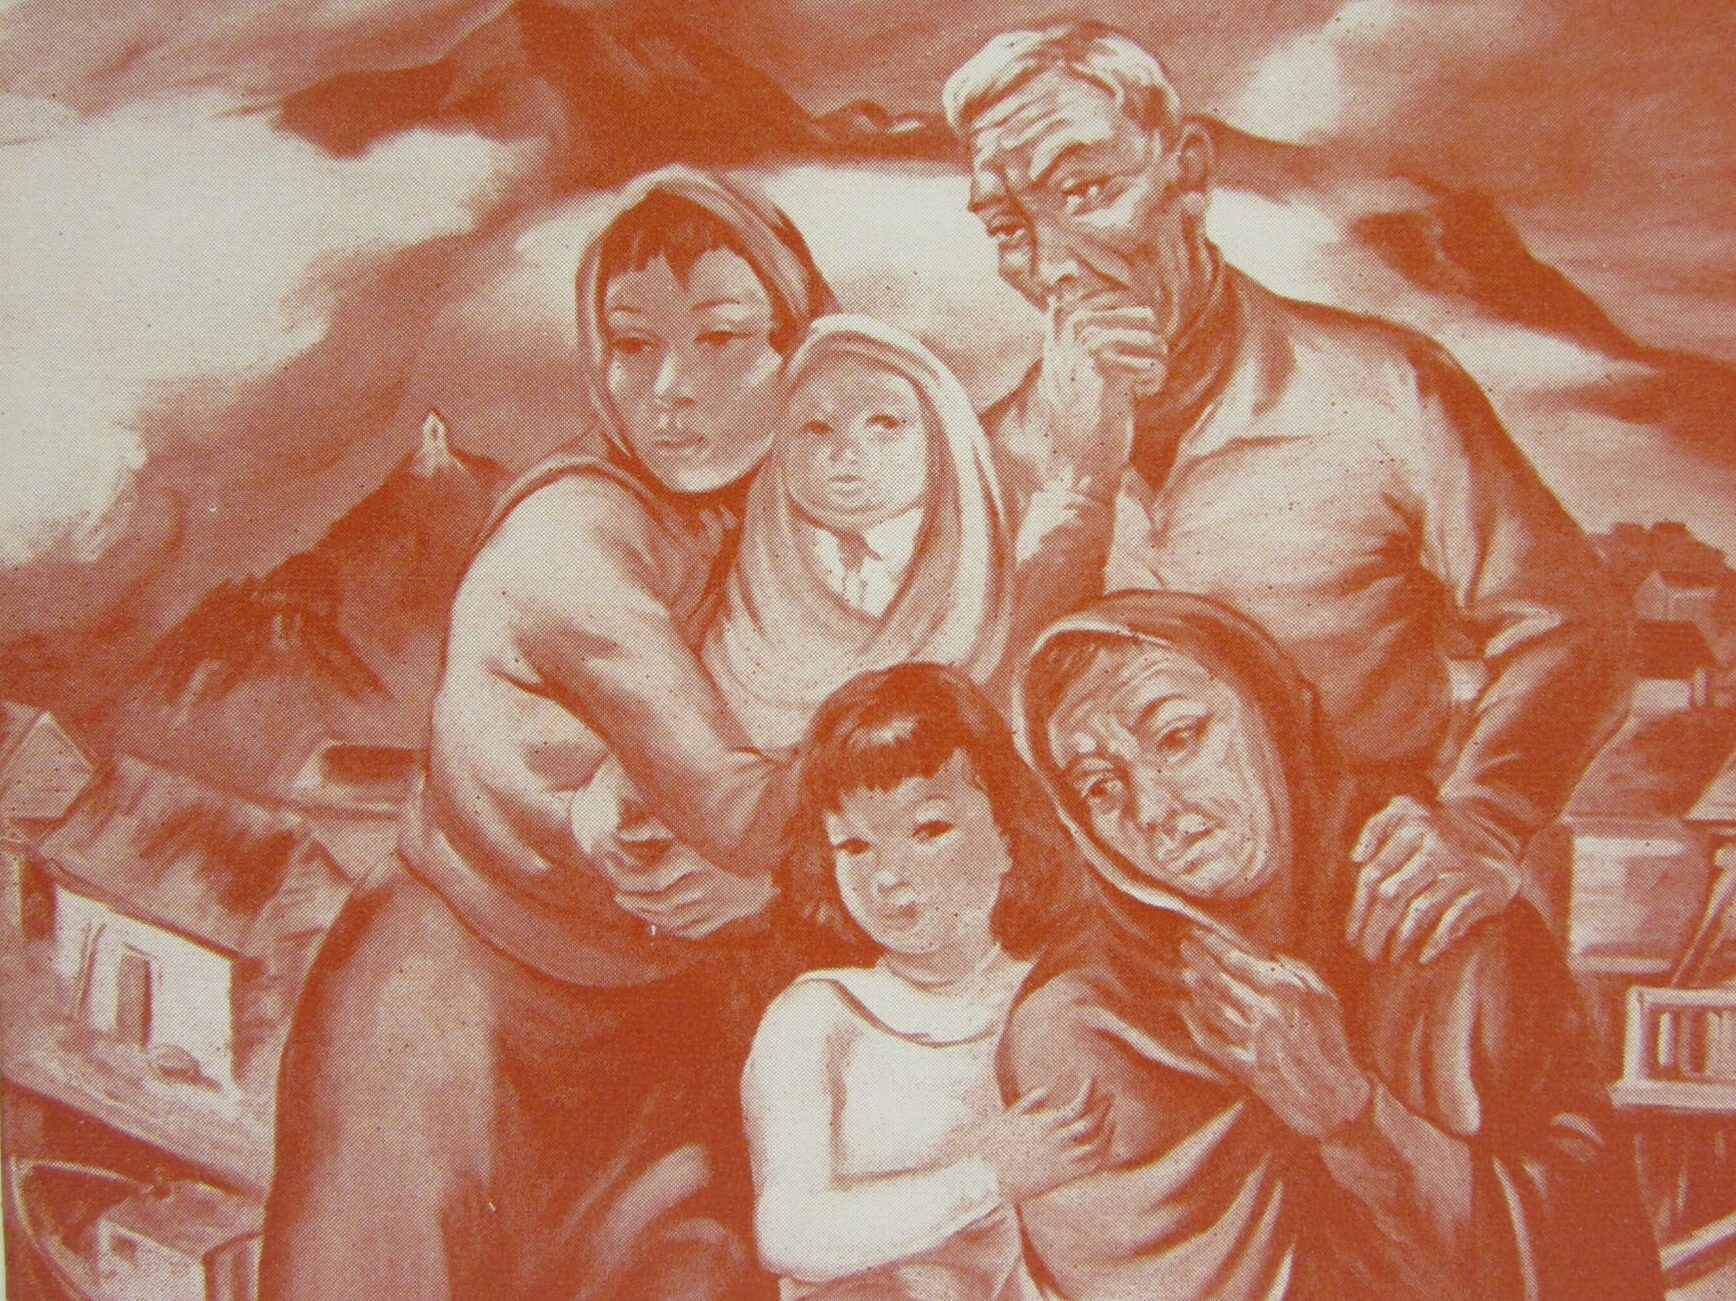 A painting of three adults and two children huddled together. They look back at a mountainous landscape with small buildings.